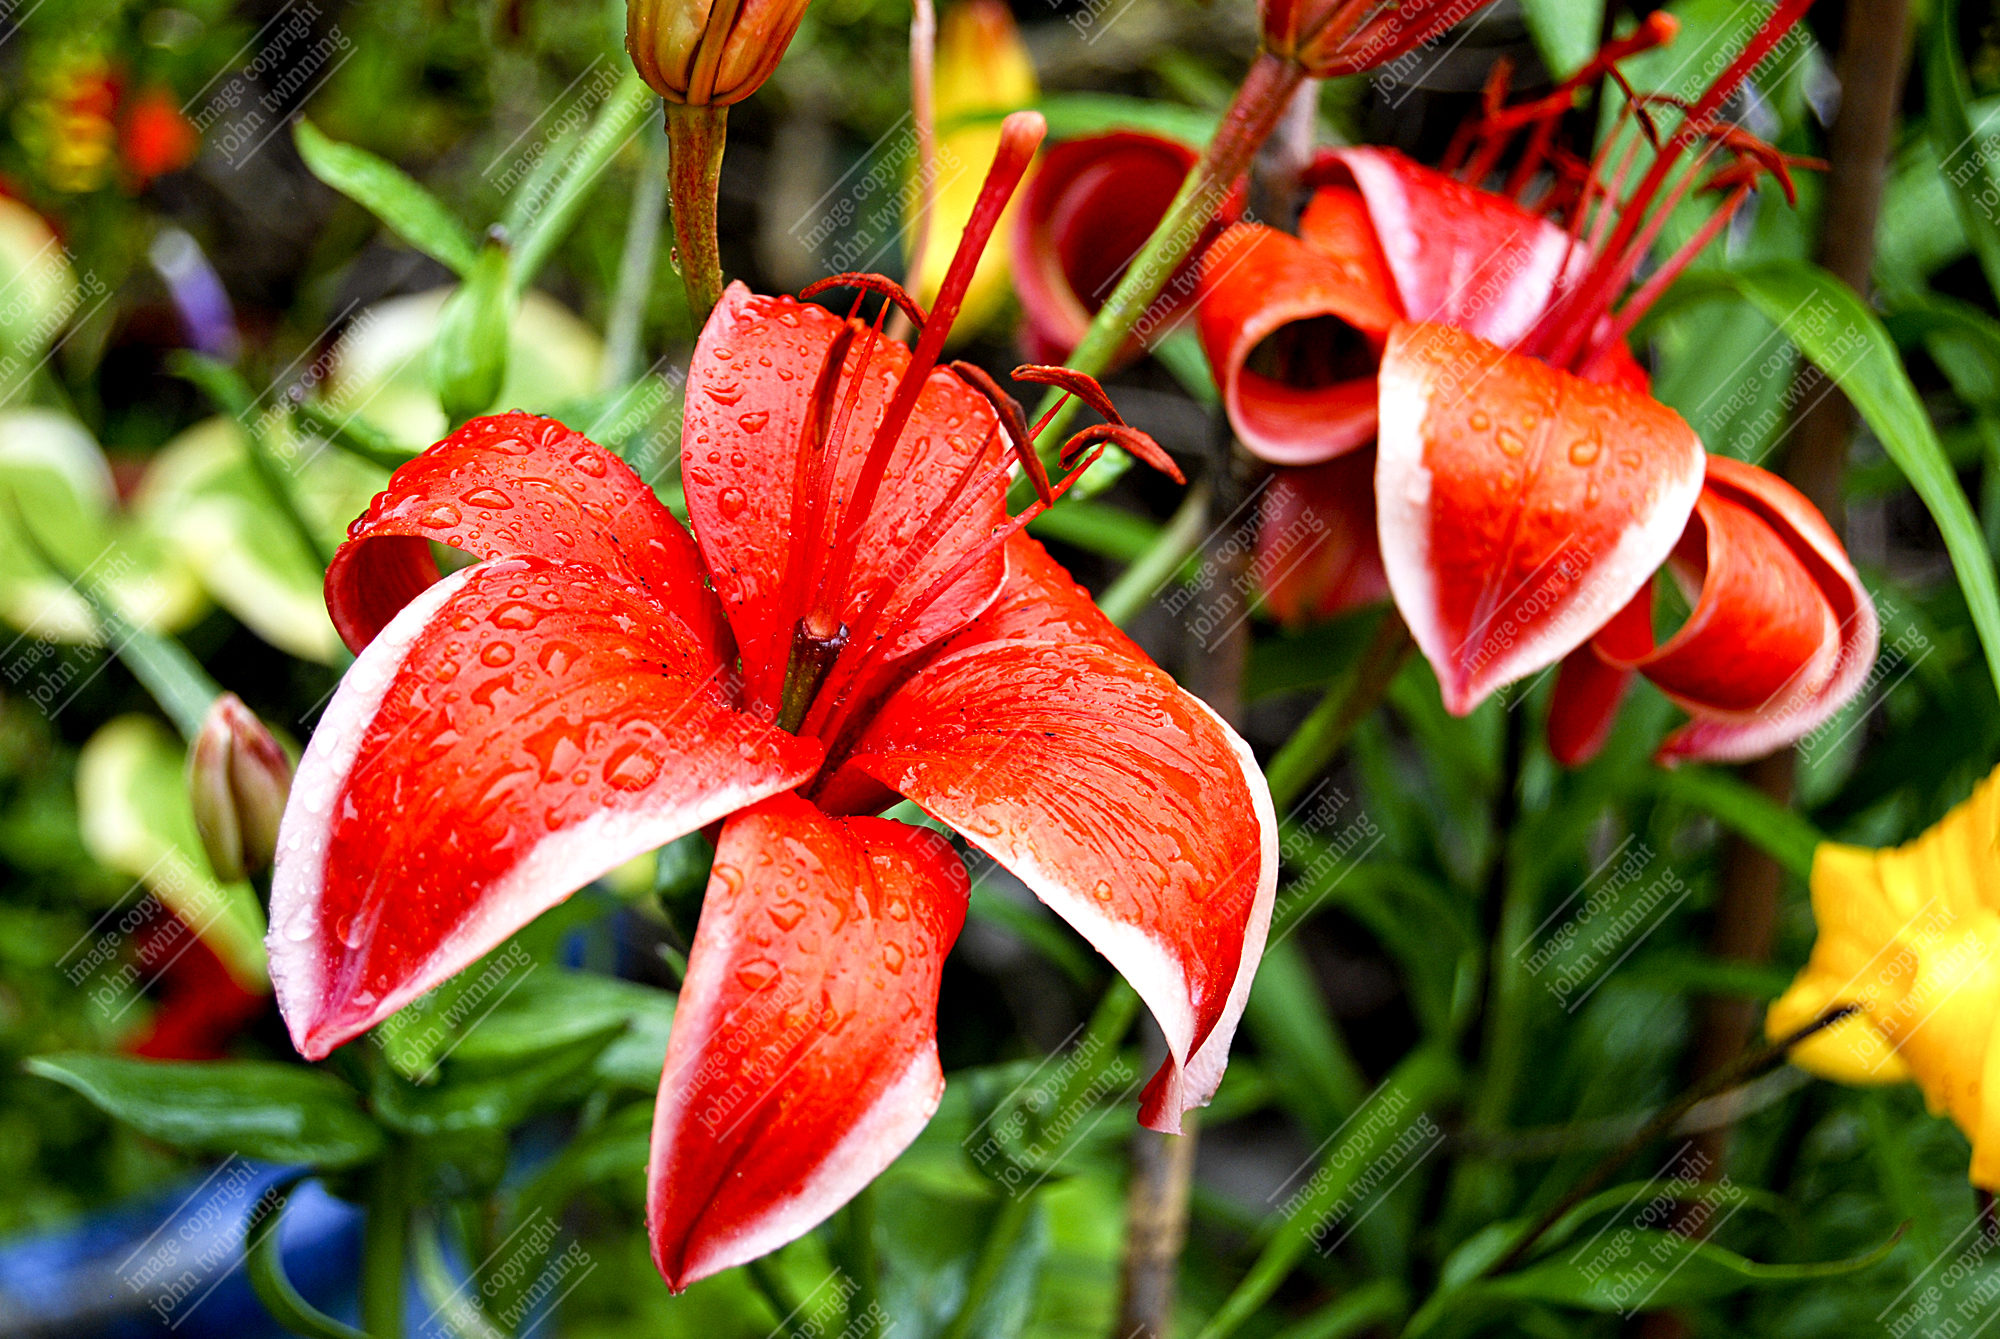 'Lillies With Raindrops' [photo] - art print from a photograph of highly colourful lillies after a rain shower